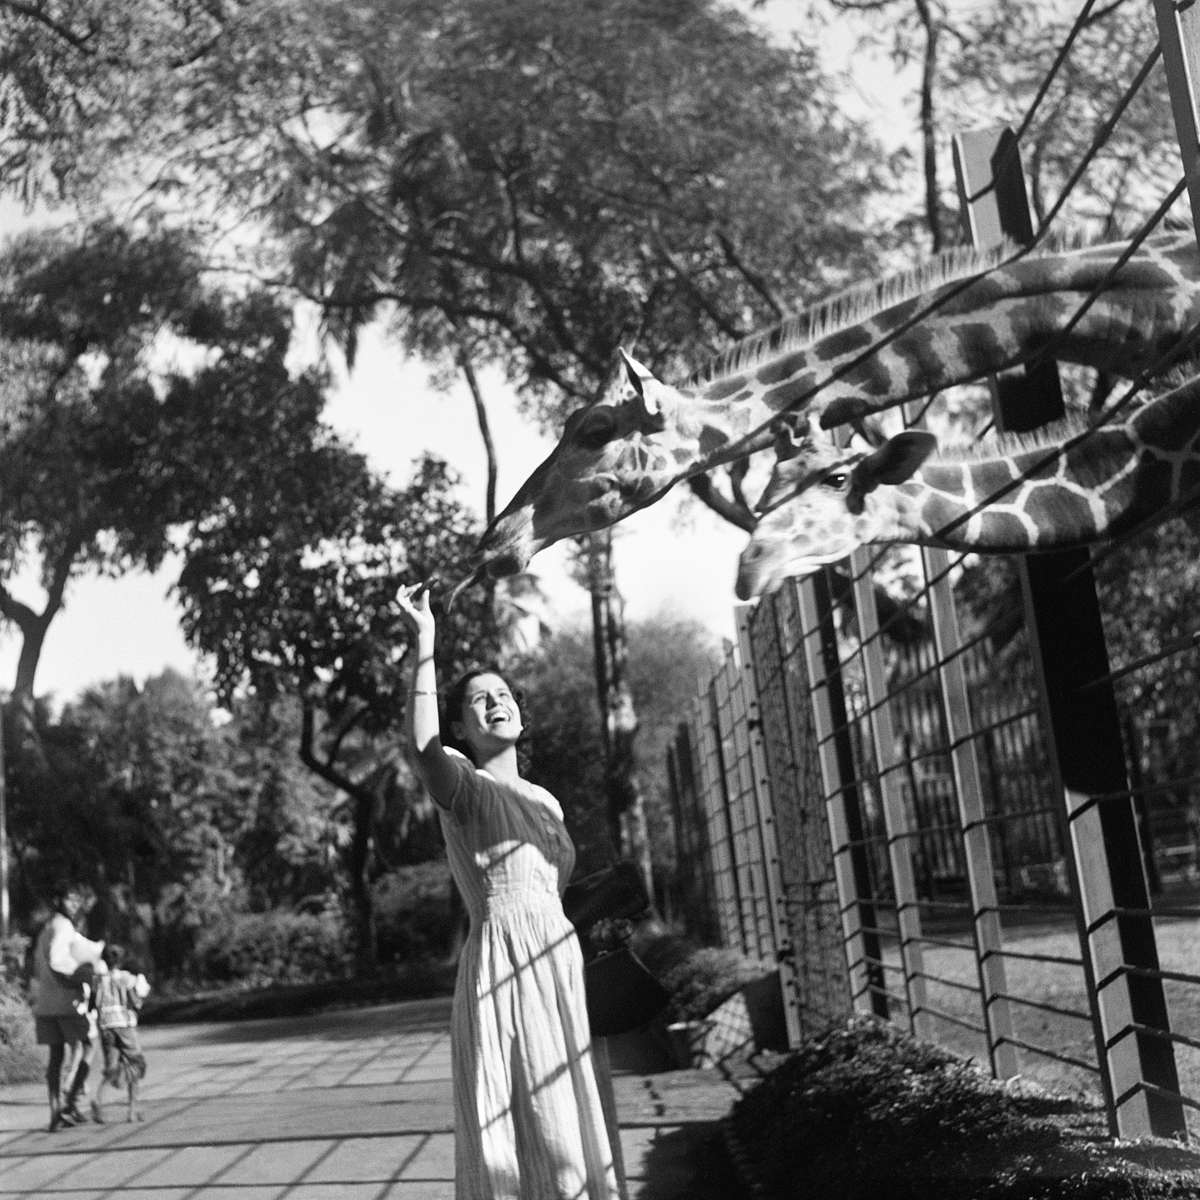 The Bombay Zoo, Late 1930s, Homai Vyarawalla. A woman is seen feeding giraffes at a zoo, she's smiling and wearing a light dress. Image is black and white.